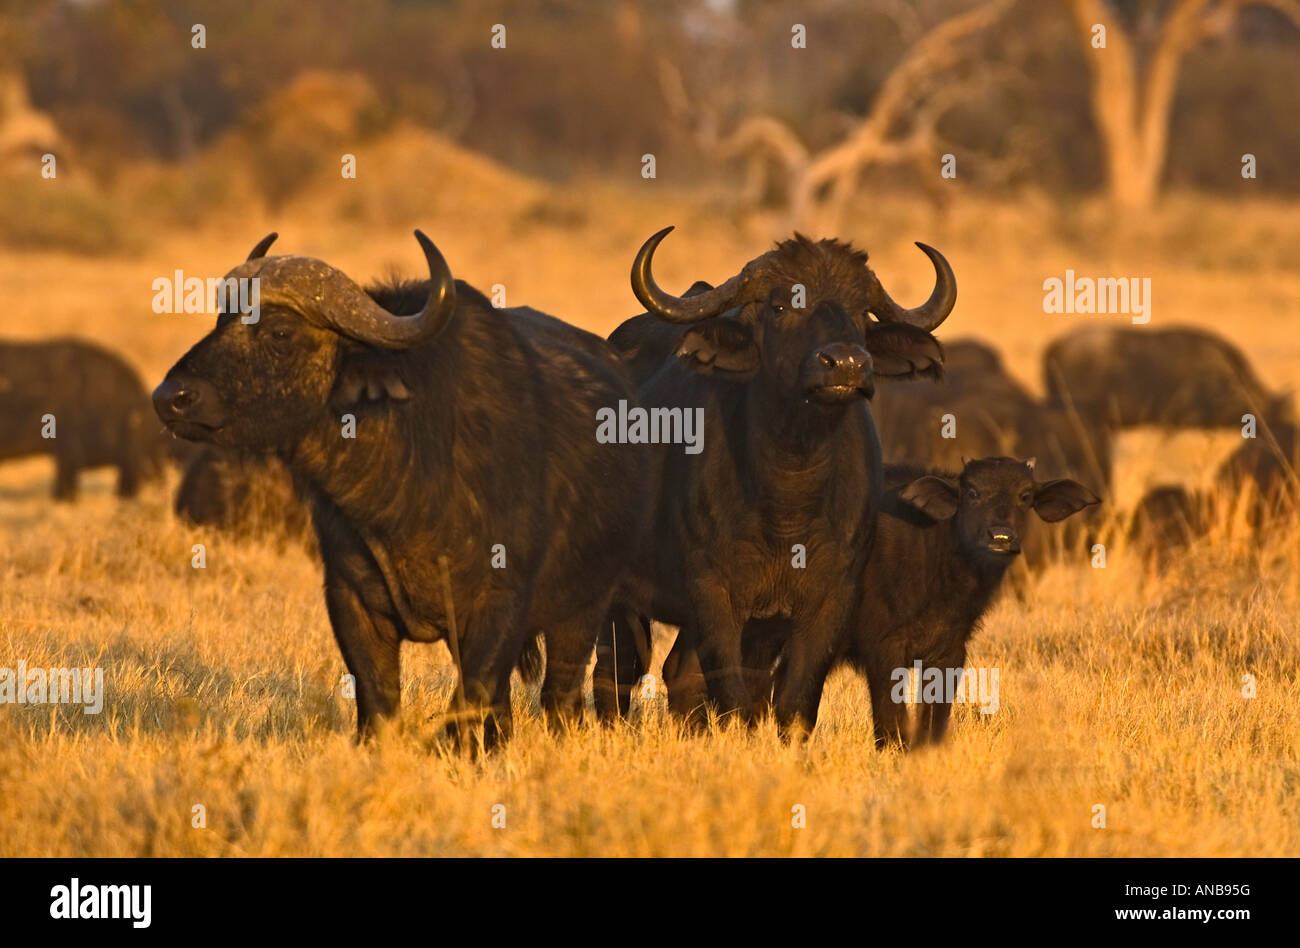 Cape buffalo (Syncerus caffer) herd with male, female and calf standing together in the foreground Stock Photo